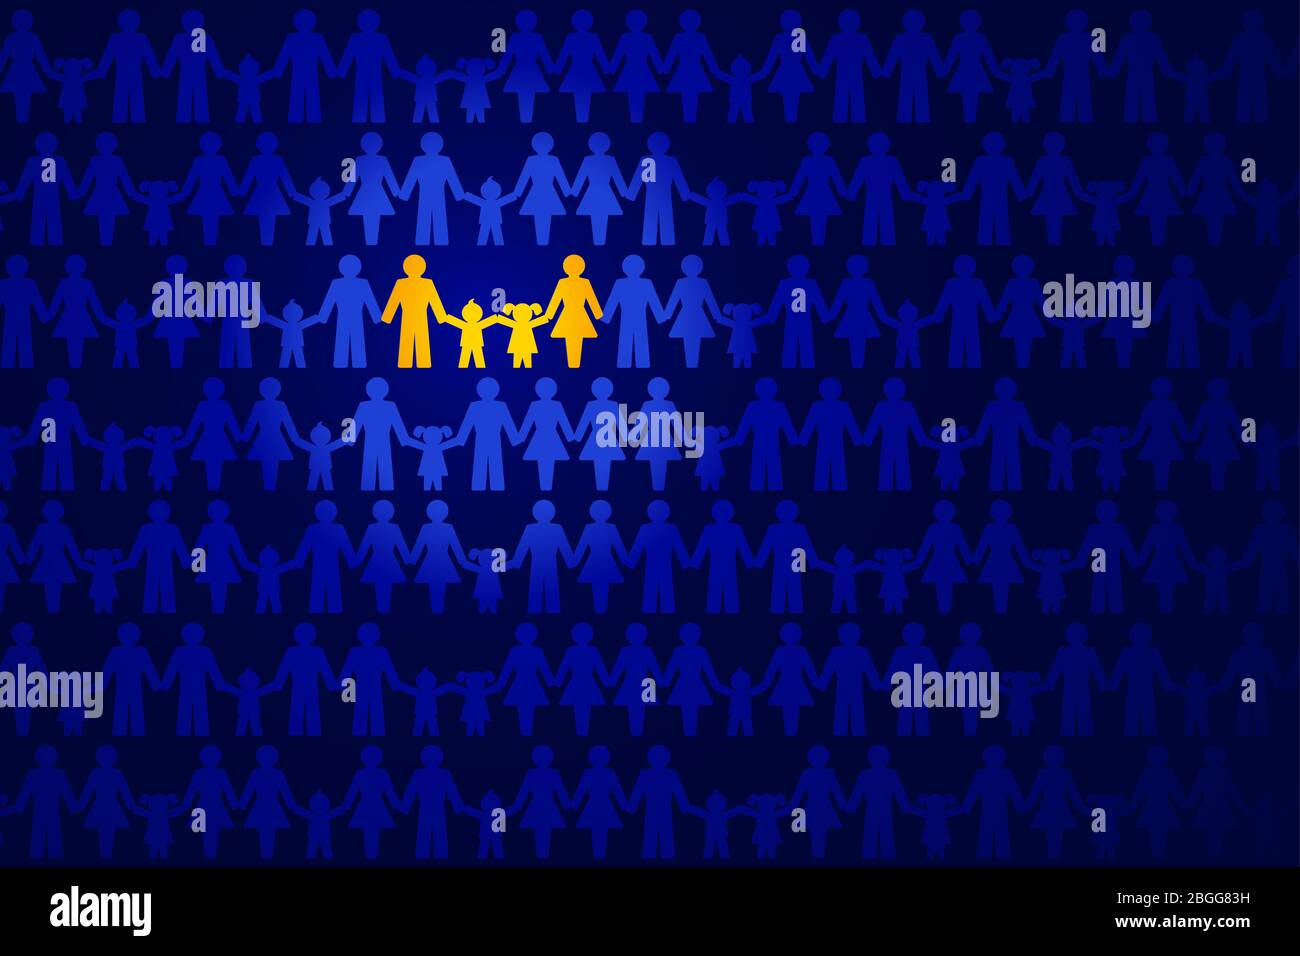 Traditional family image. Family holding hands, highlighted in yellow, in a crowd of people over dark blue. Symbolic family image. Stock Photo